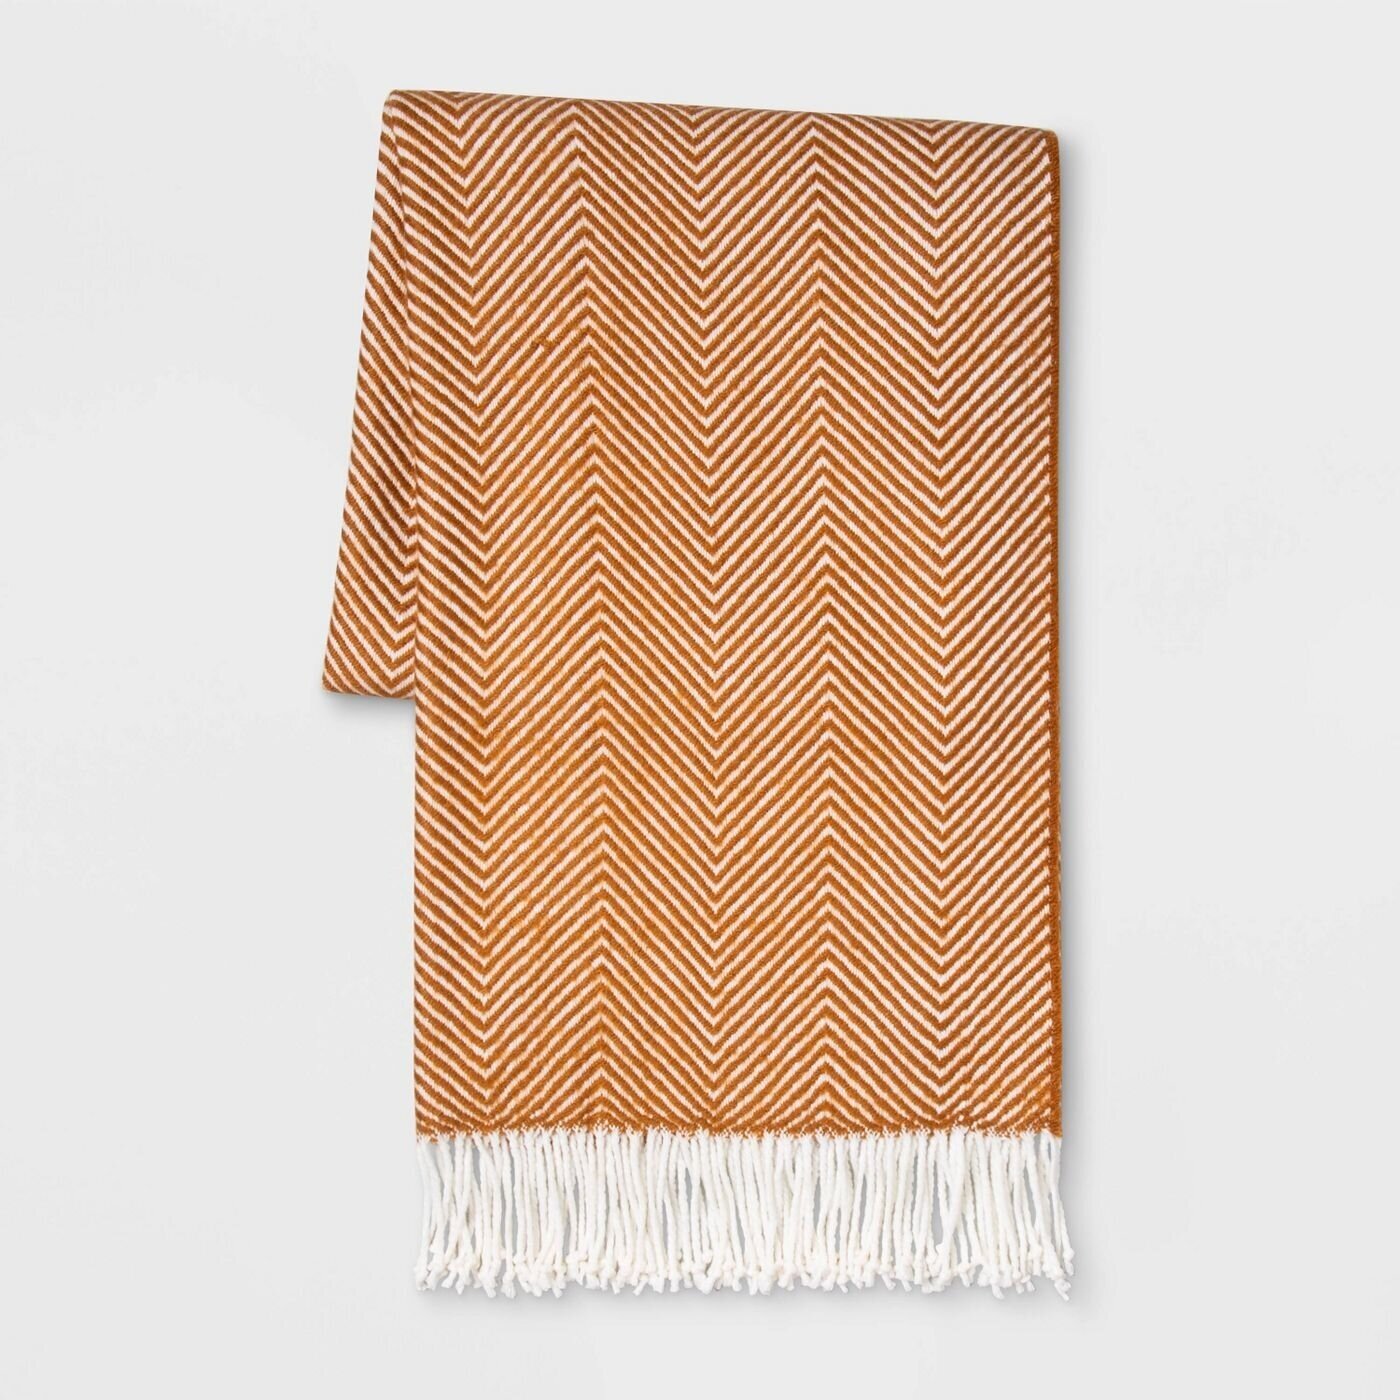 It wouldn’t be a fall blog post with a few mentions of blankets, right? I love this cozy and affordable throw blanket that screams fall but doesn’t break the bank.